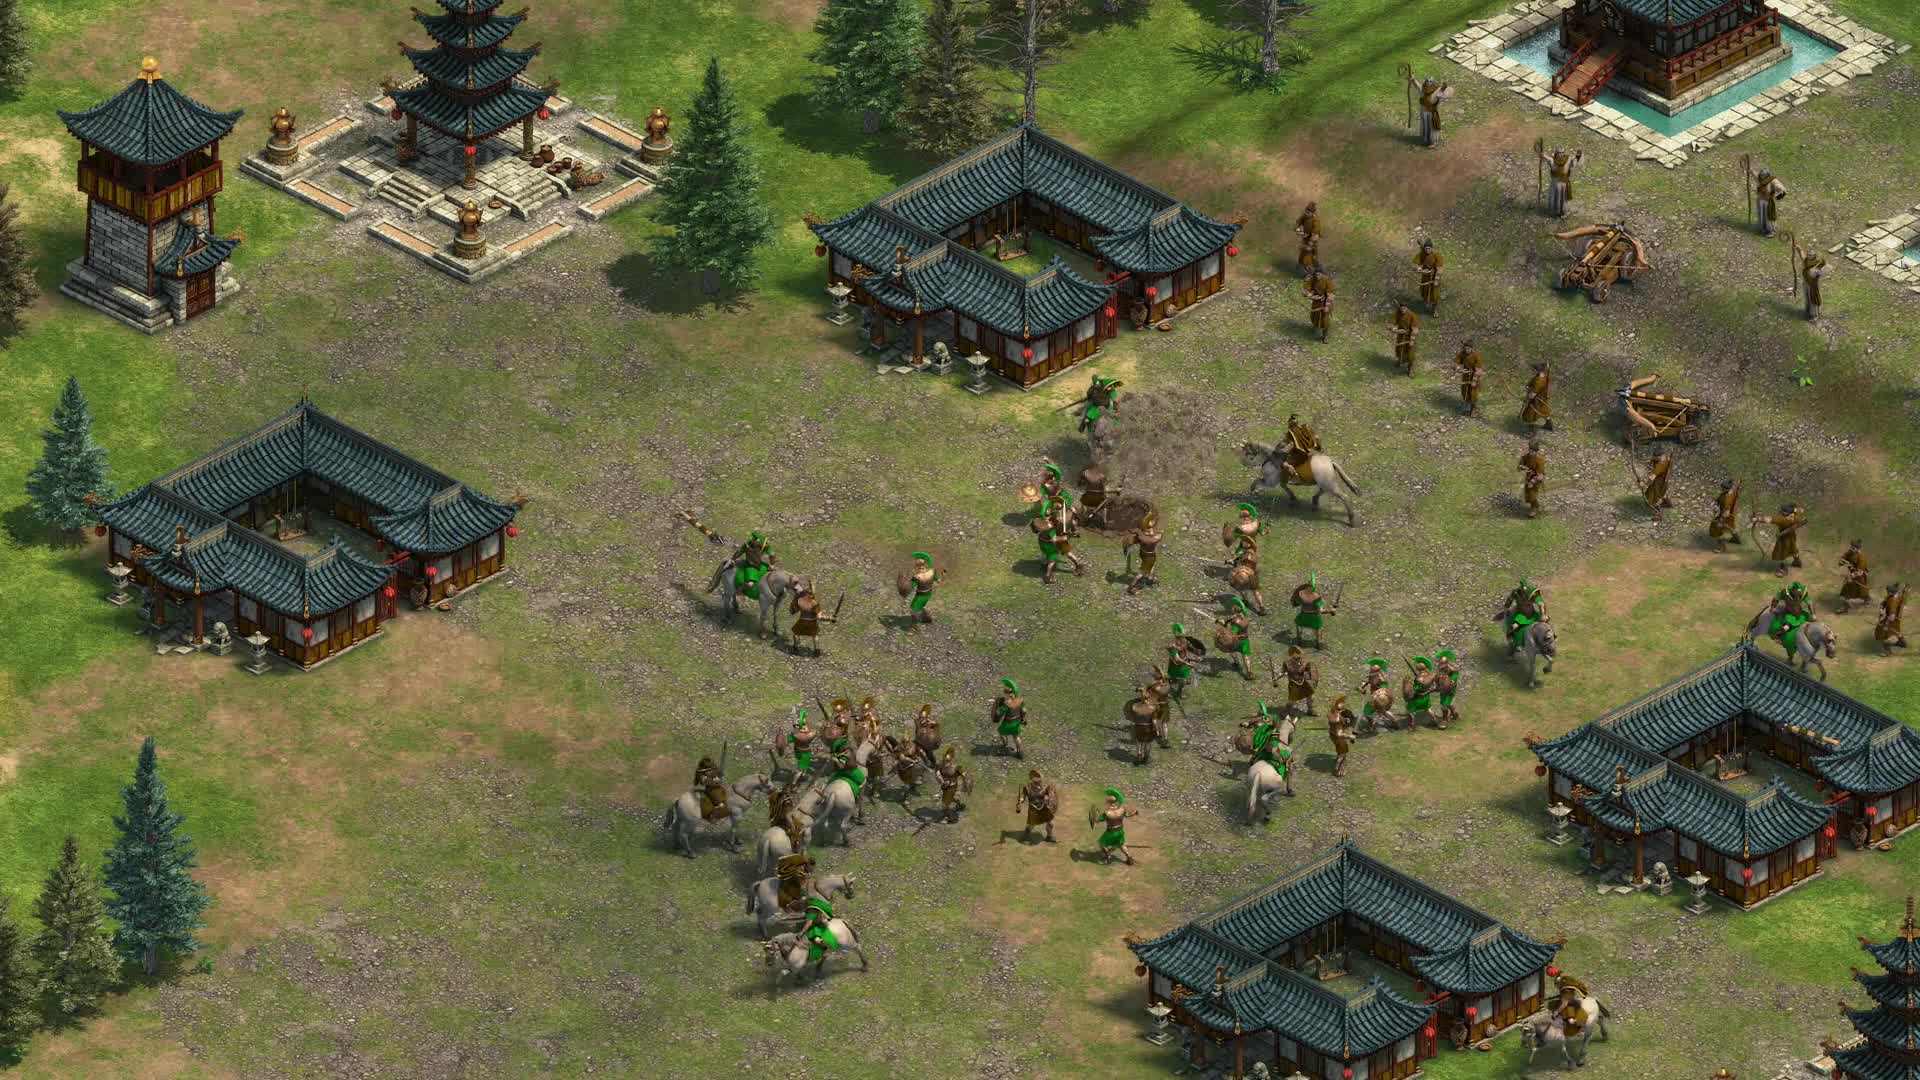 Age of Empires: Definitive edition - ohlsenie